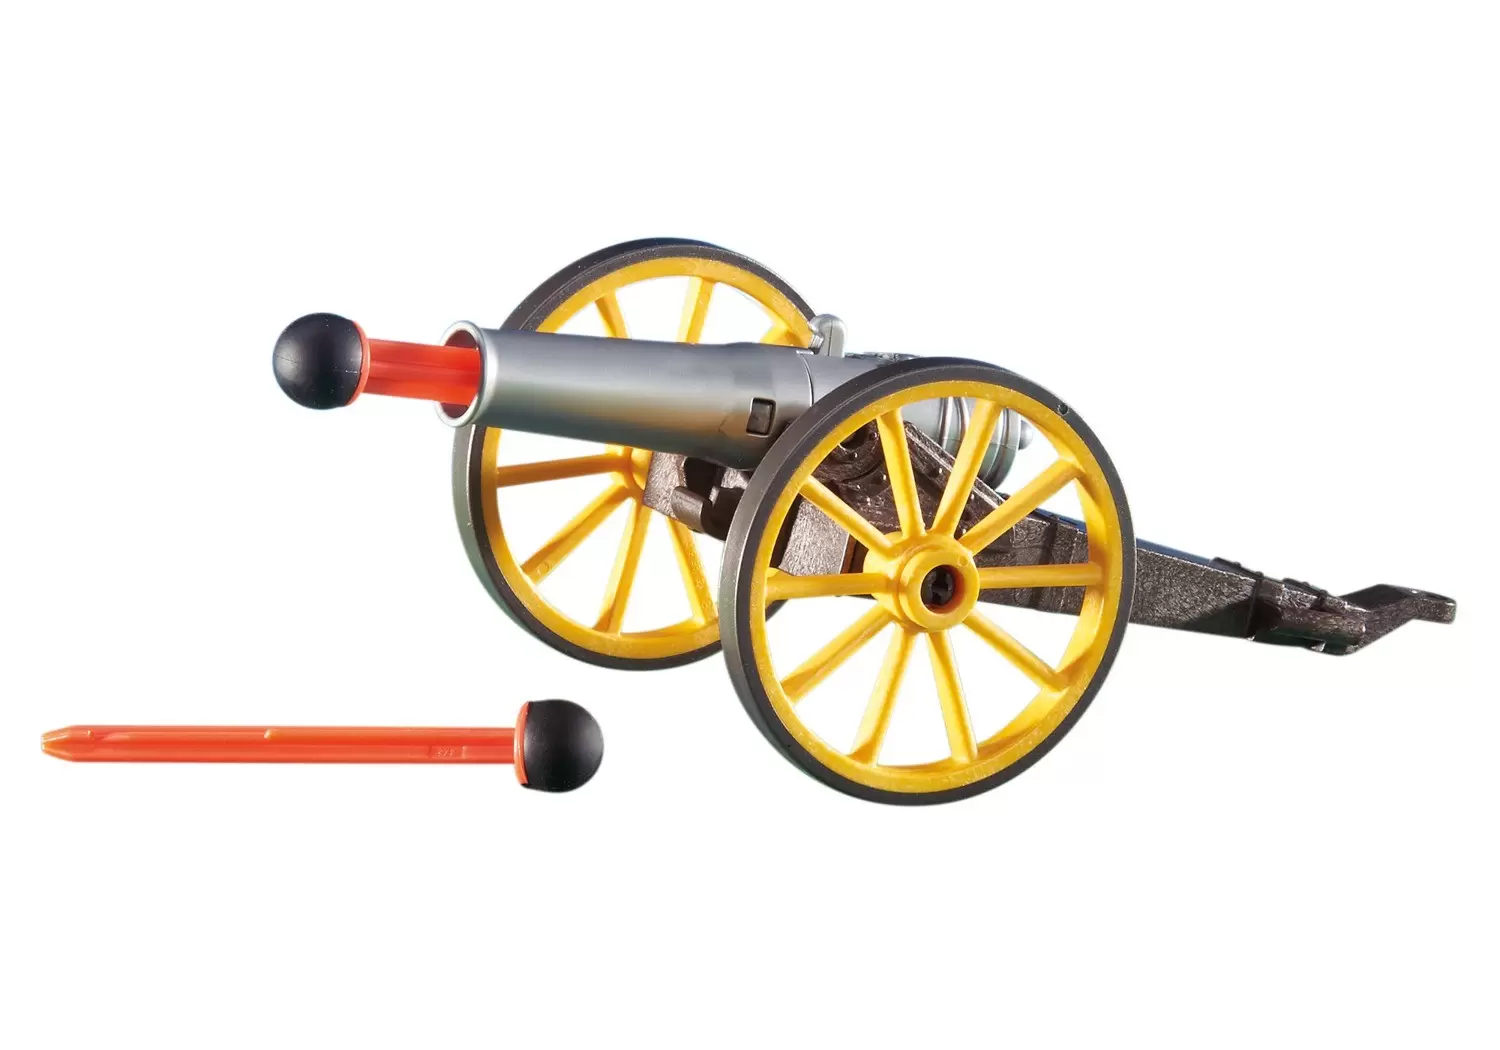 Playmobil Middle-Ages - Cannon Carriage